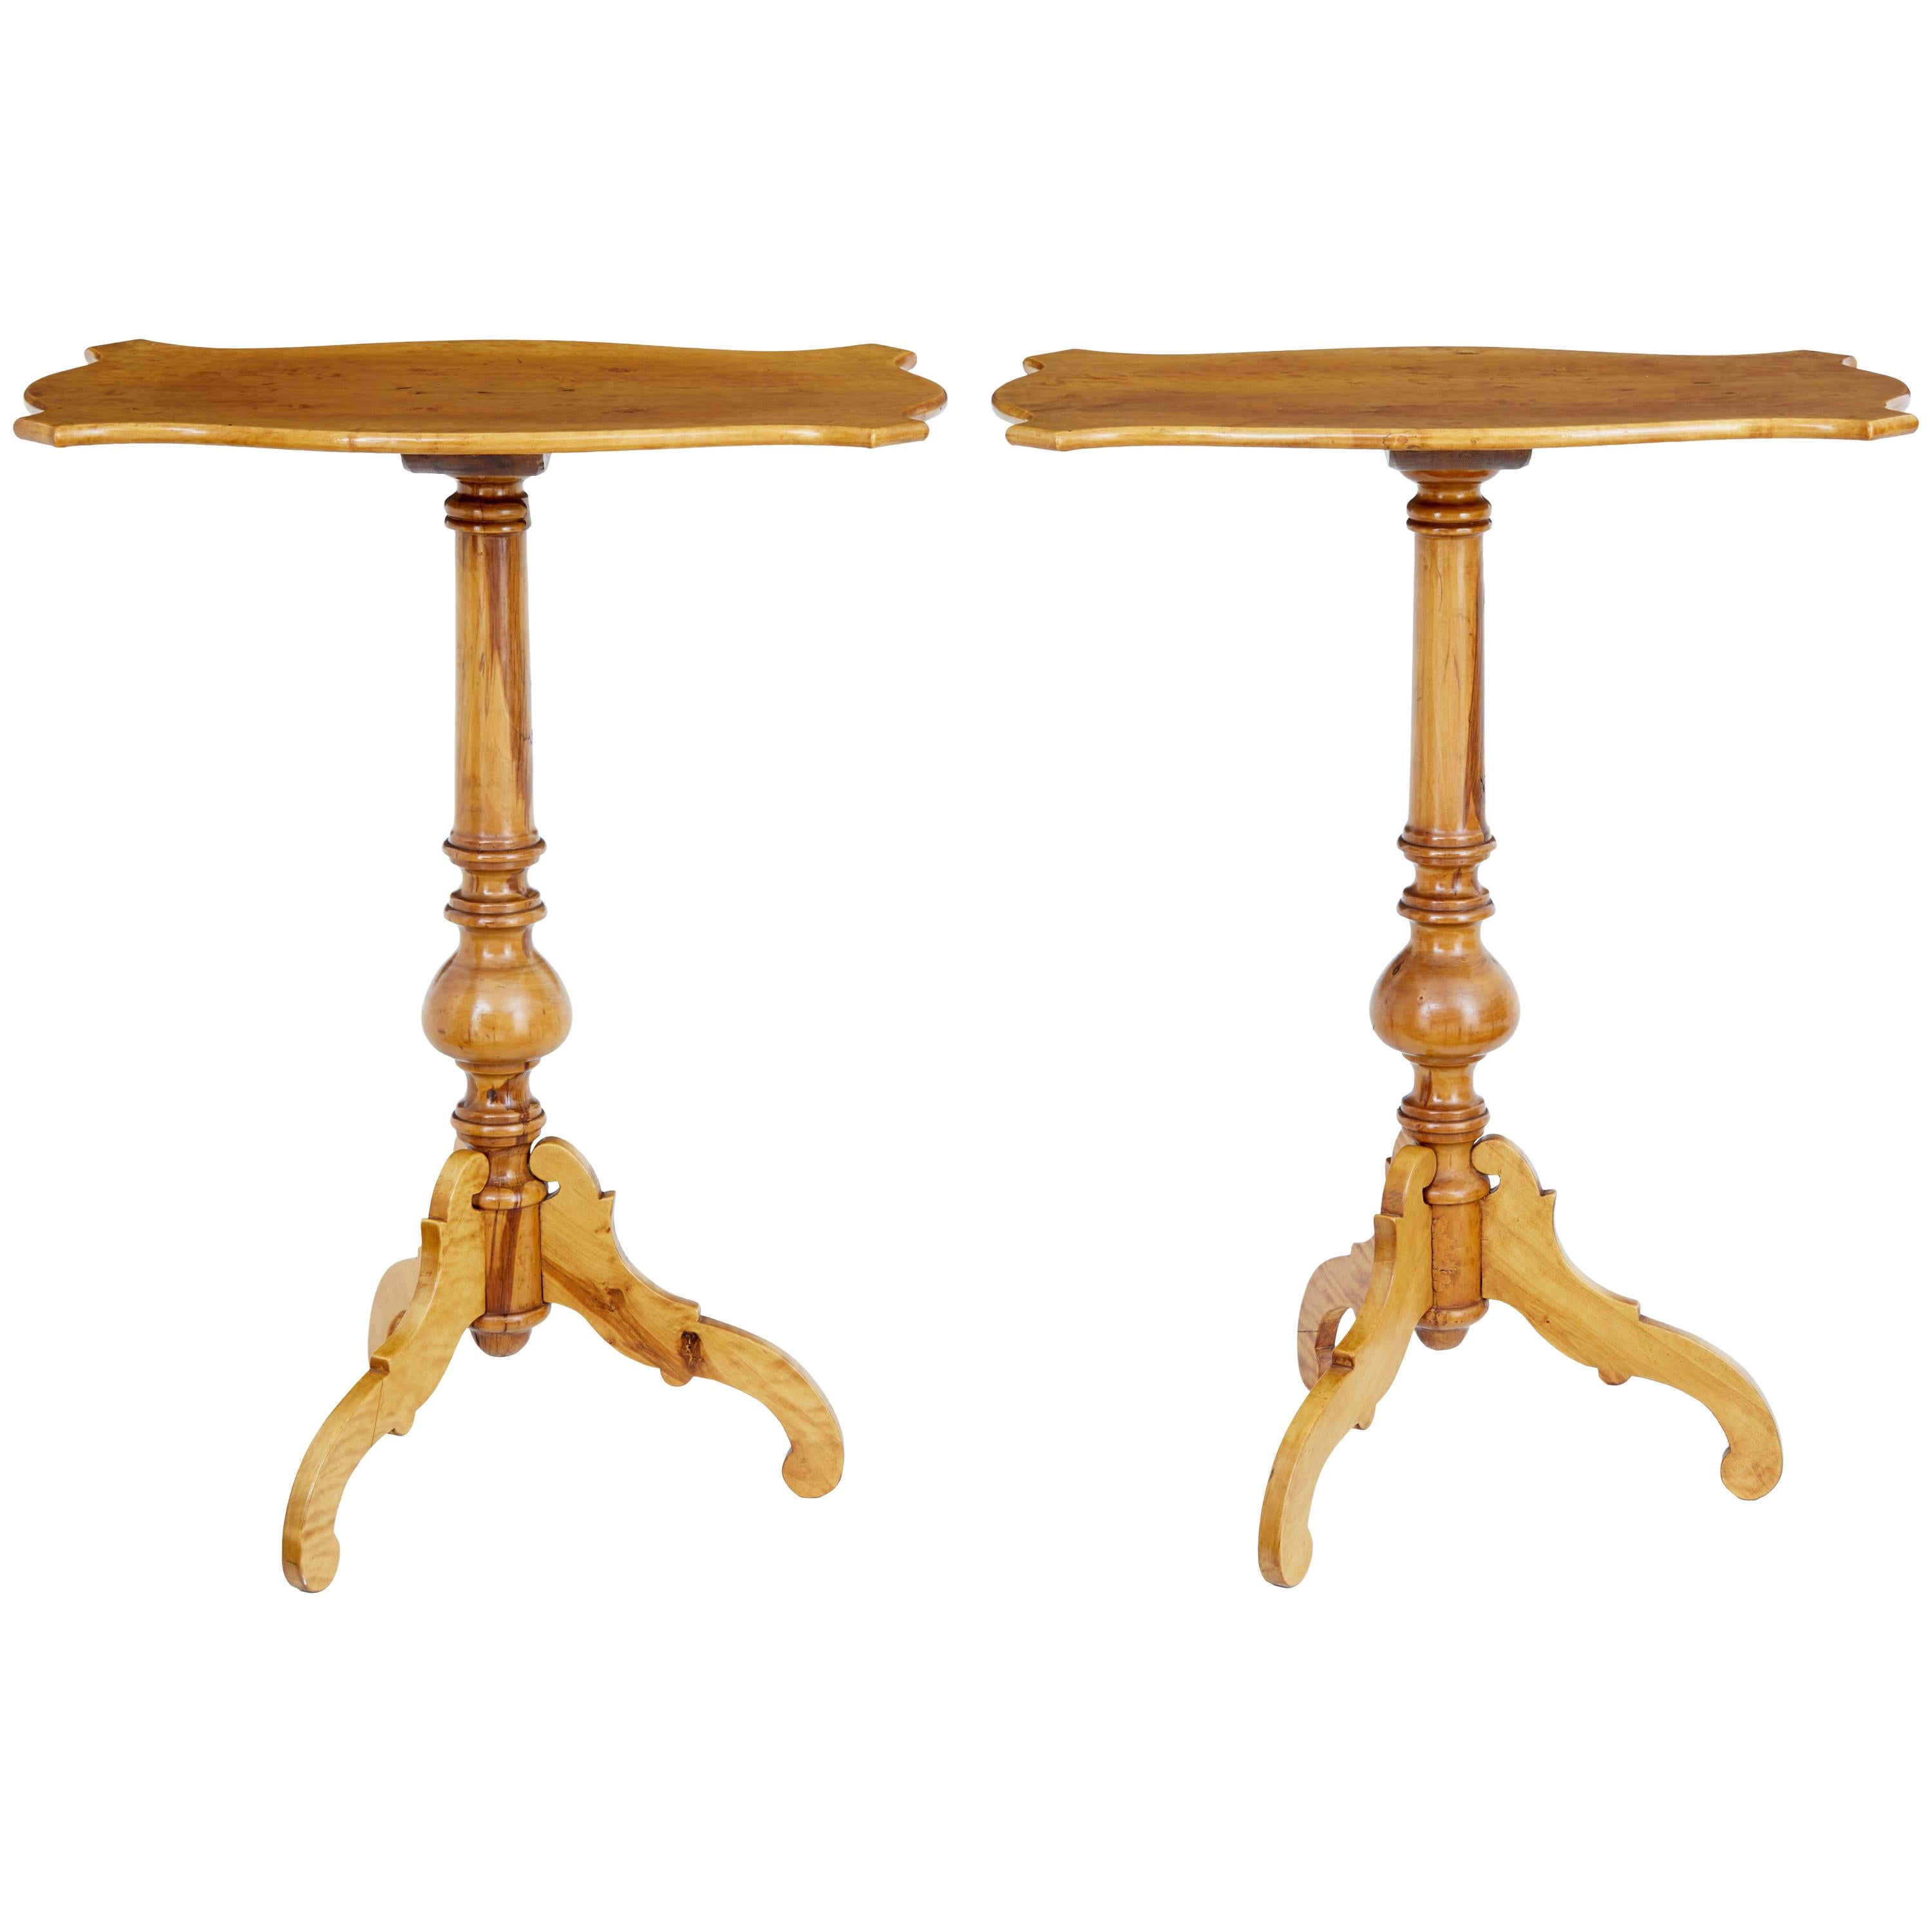 Pair of Late 19th Century Birch Occasional Tables